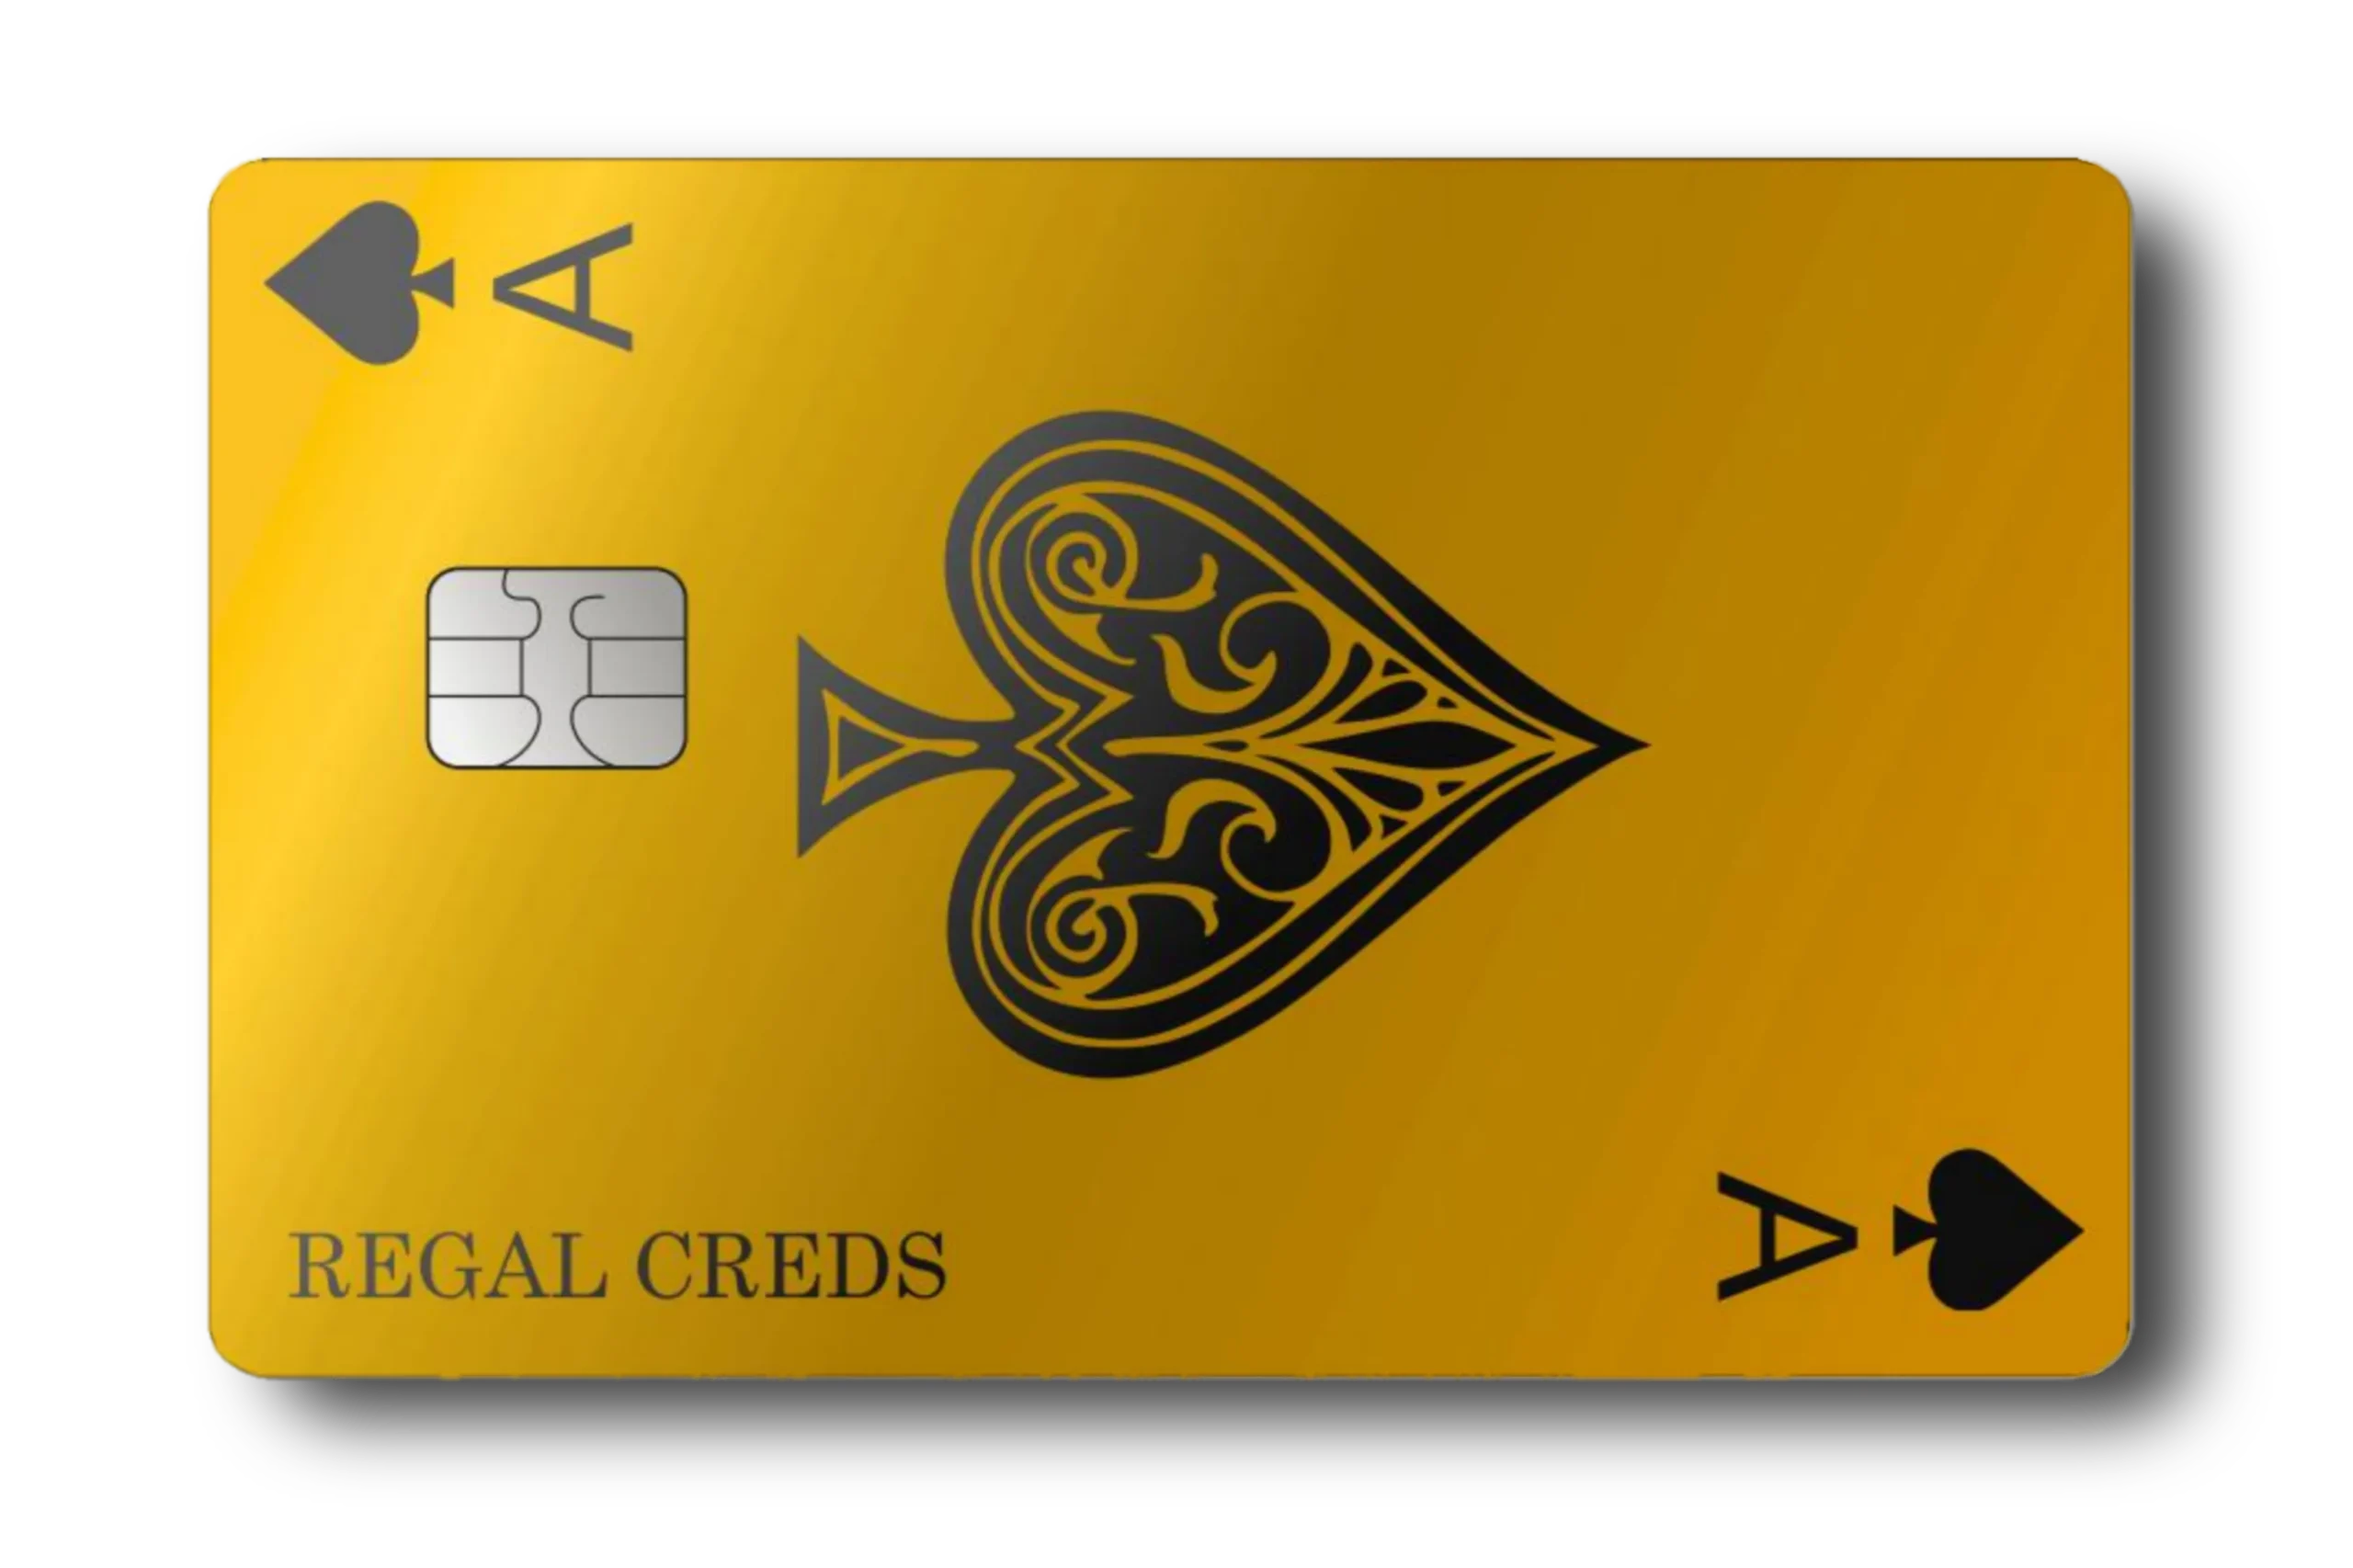 The 'Ace Of Spade' Card